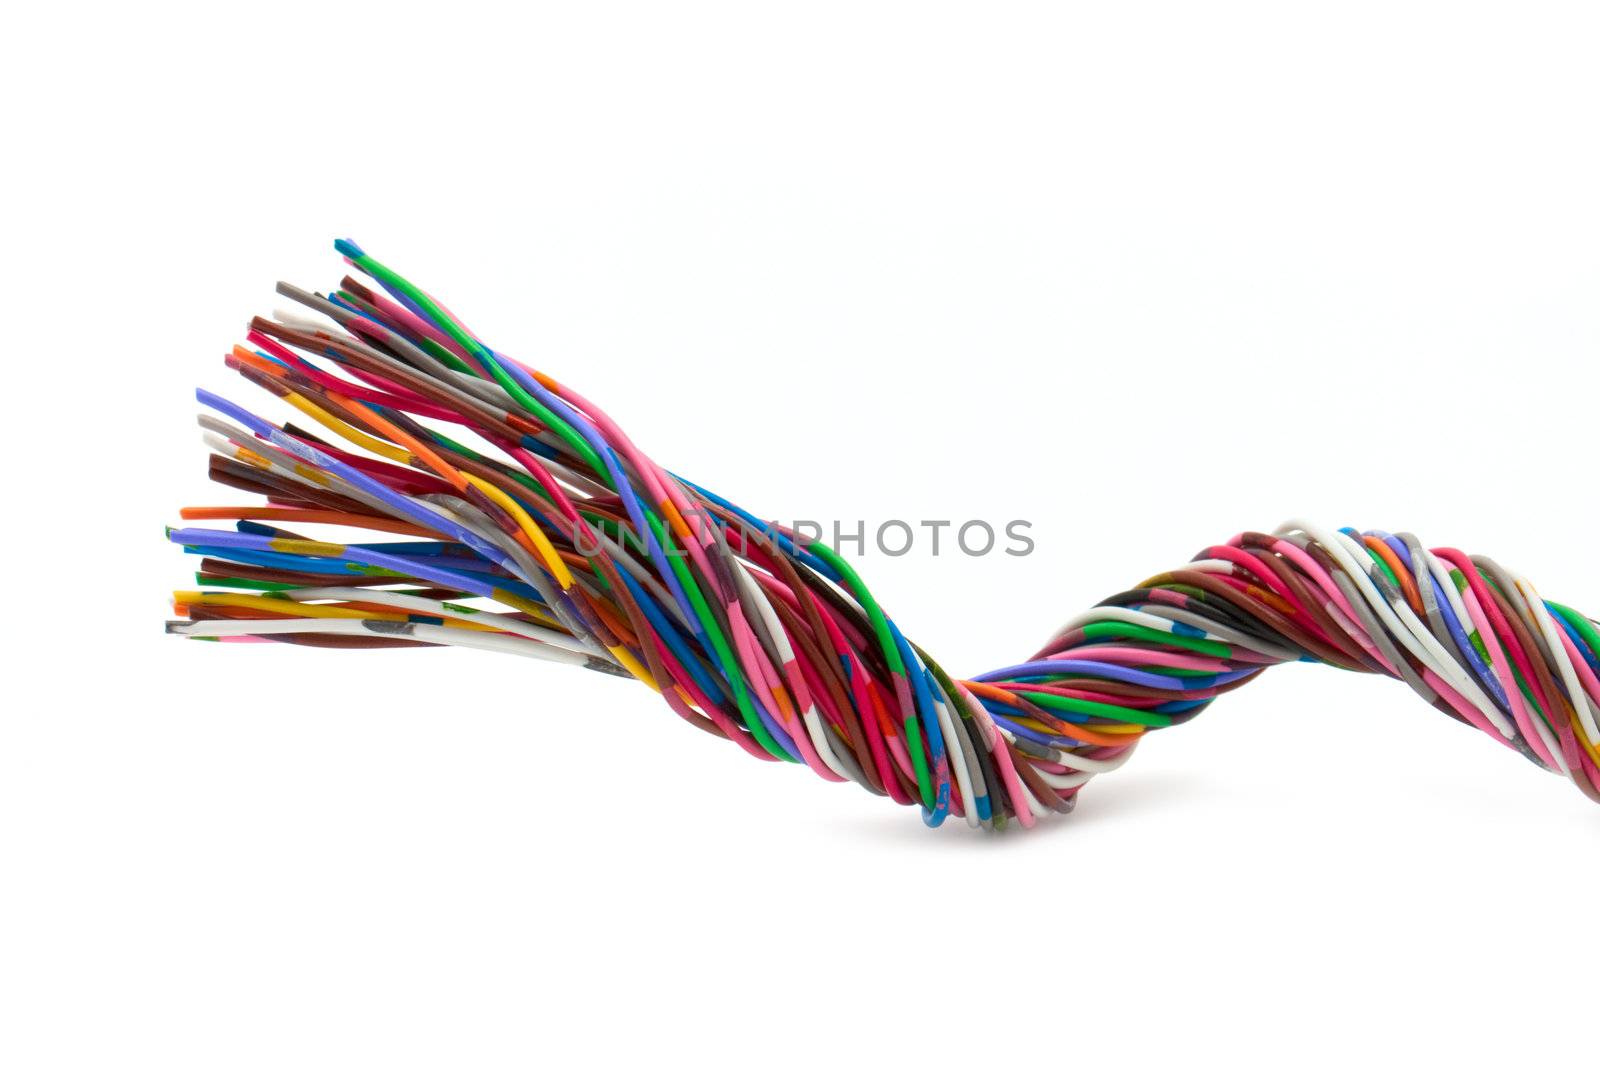 Telecommunication multicolored wires